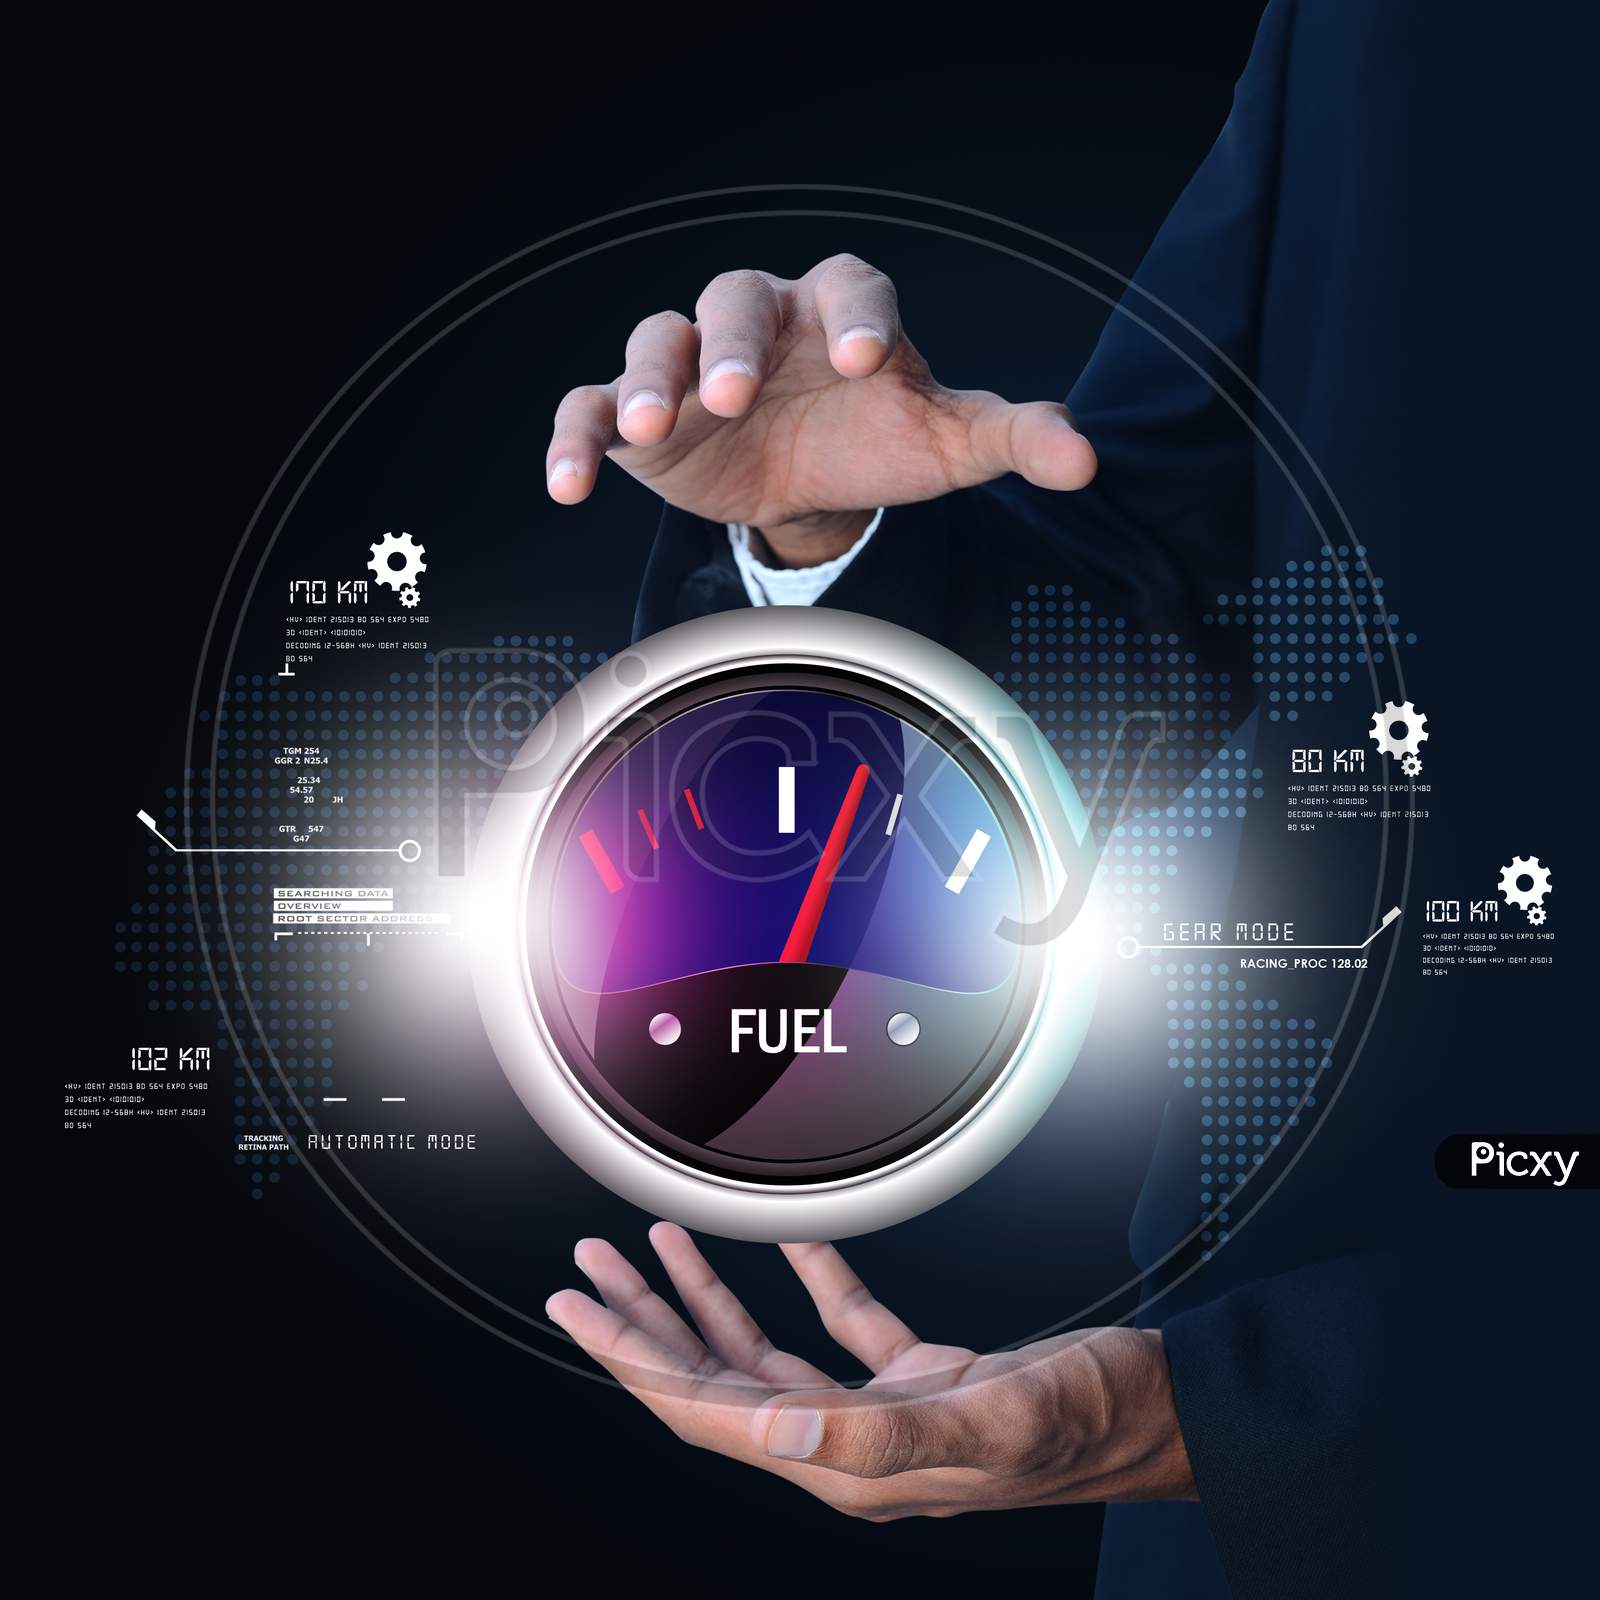 Close up shot of a person's hands with a Fuel Indicator